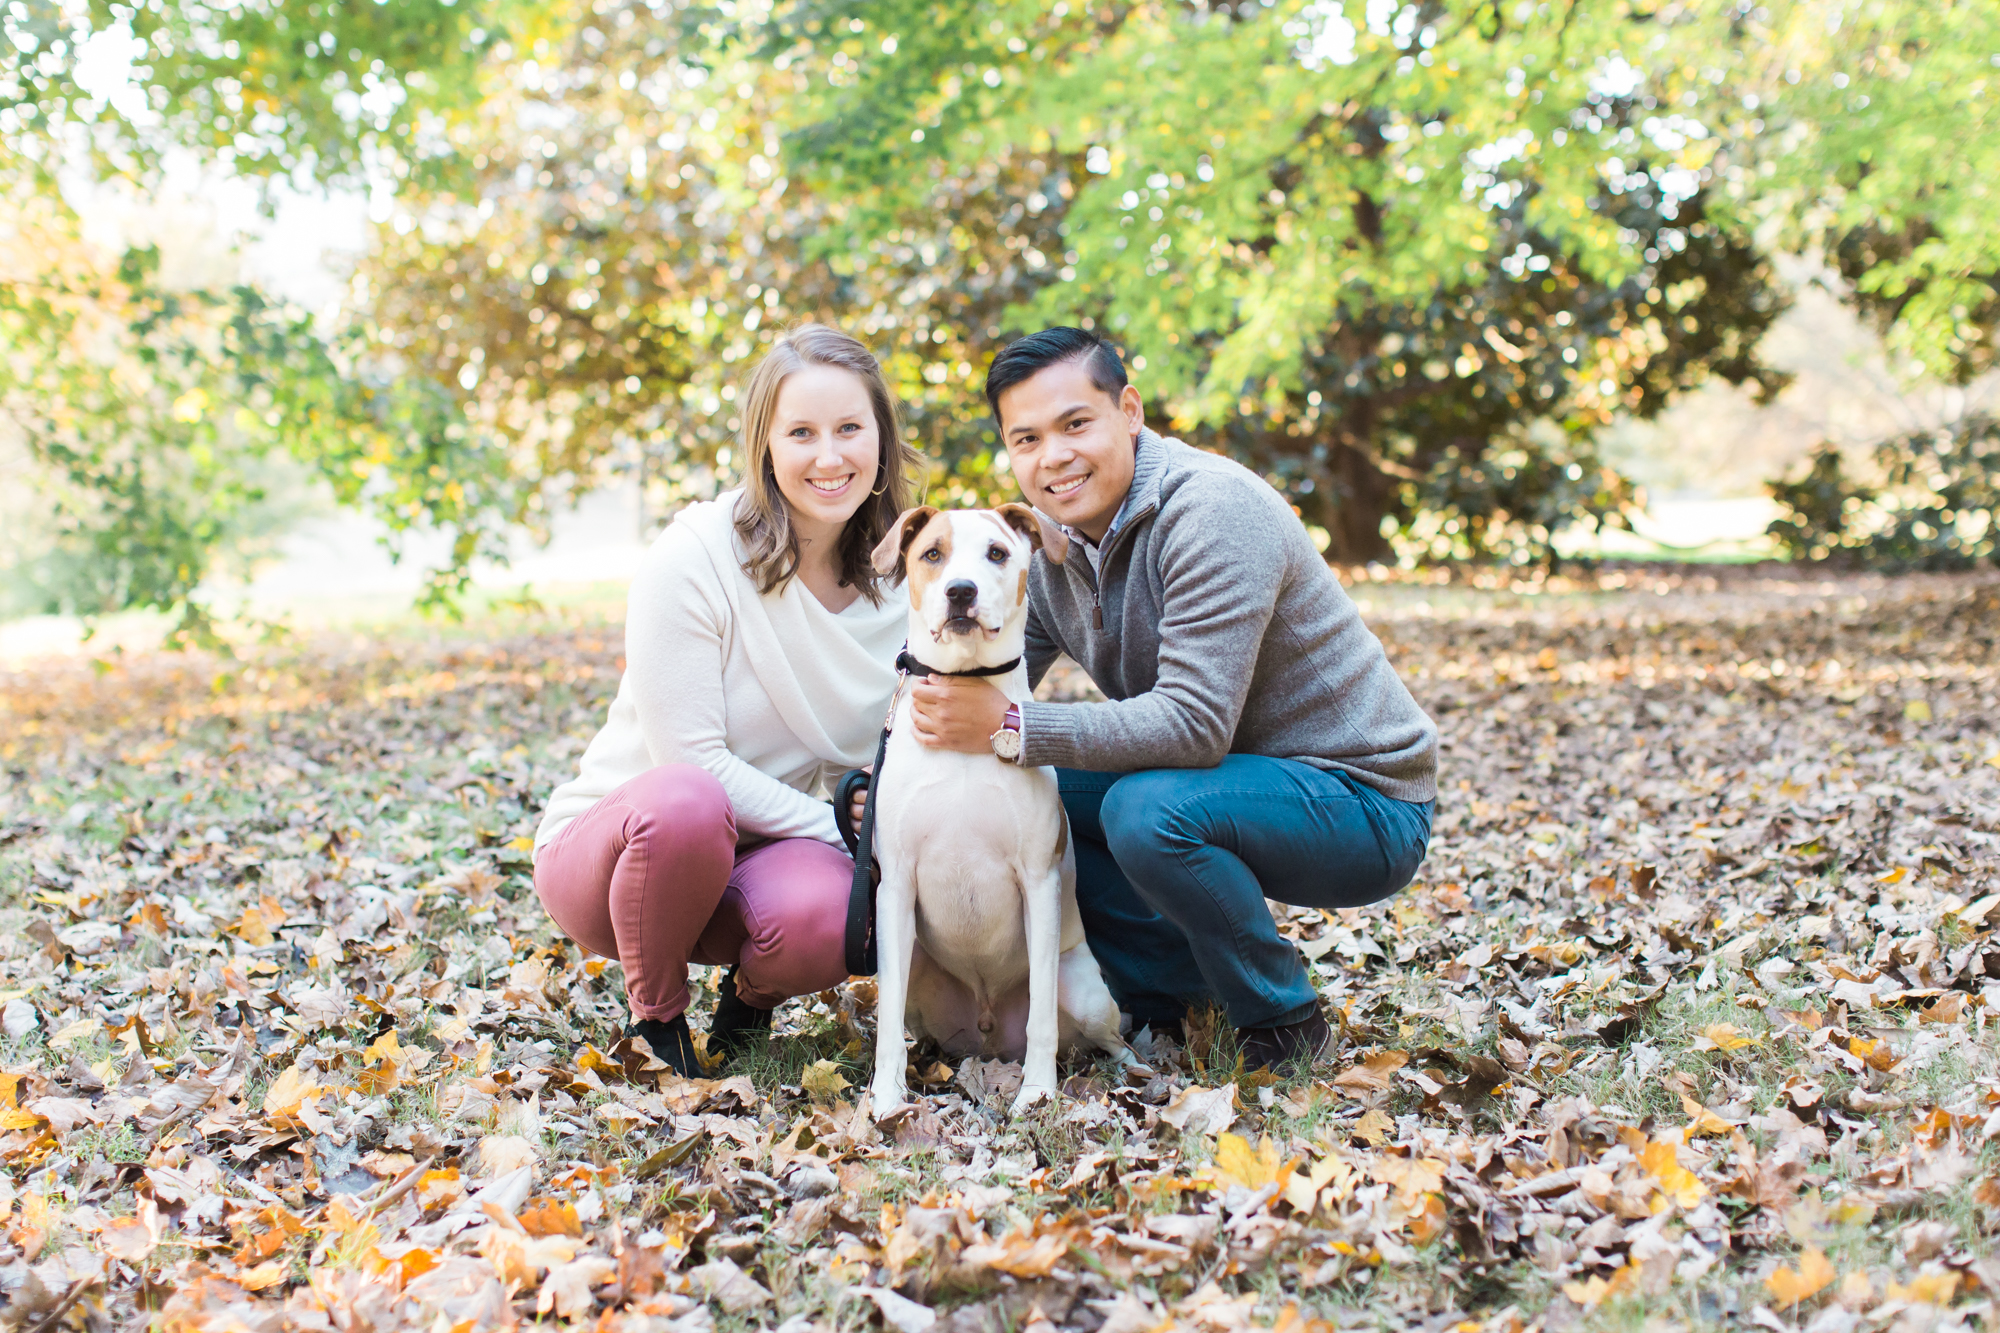 Bring your dog along to your engagement session! Gotta love your fur baby!